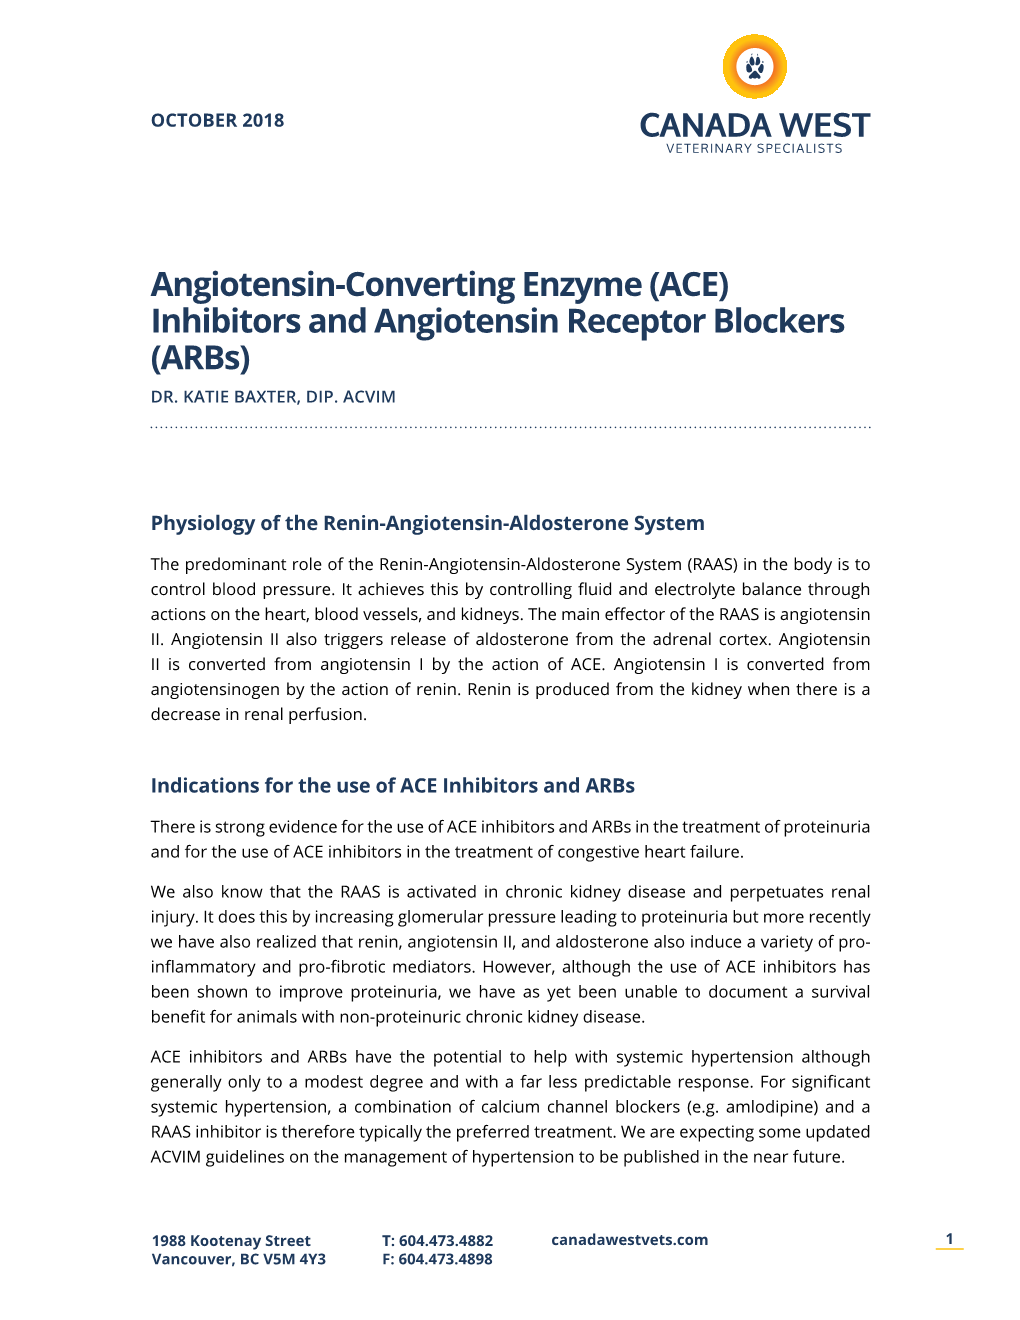 (ACE) Inhibitors and Angiotensin Receptor Blockers (Arbs) DR